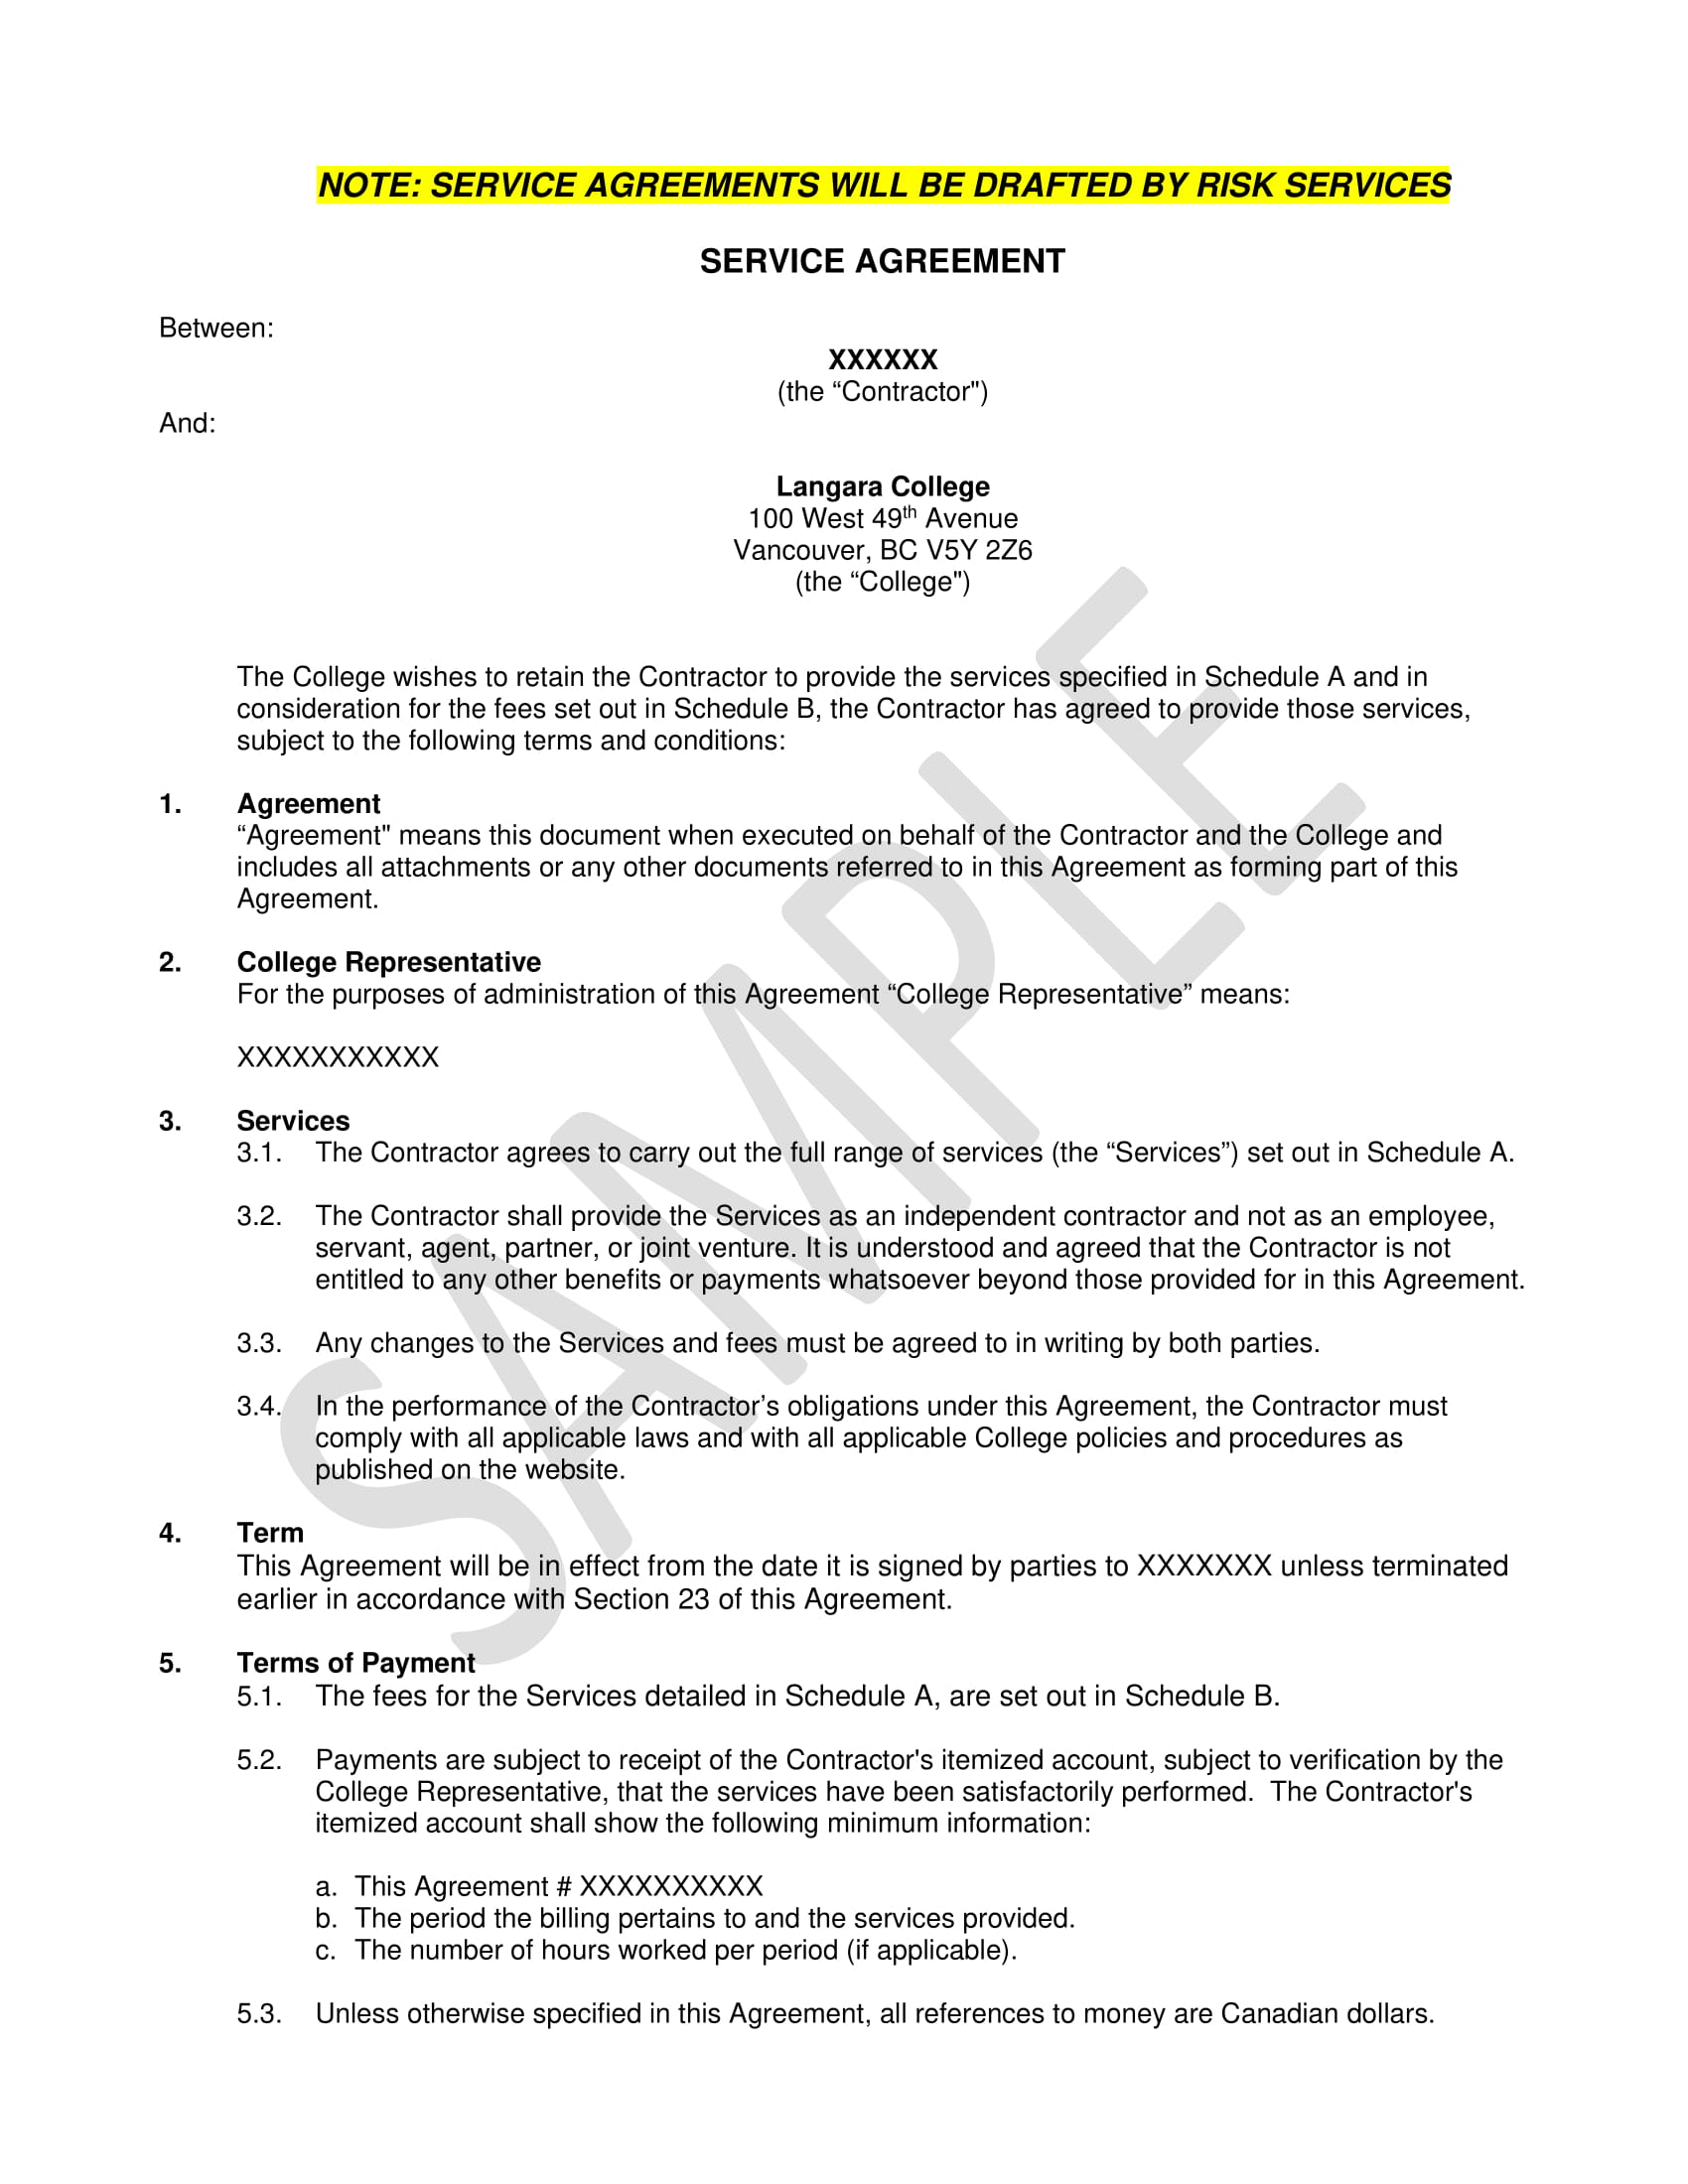 22+ Service Agreement Contract Template Examples - PDF, Word In client service agreement template